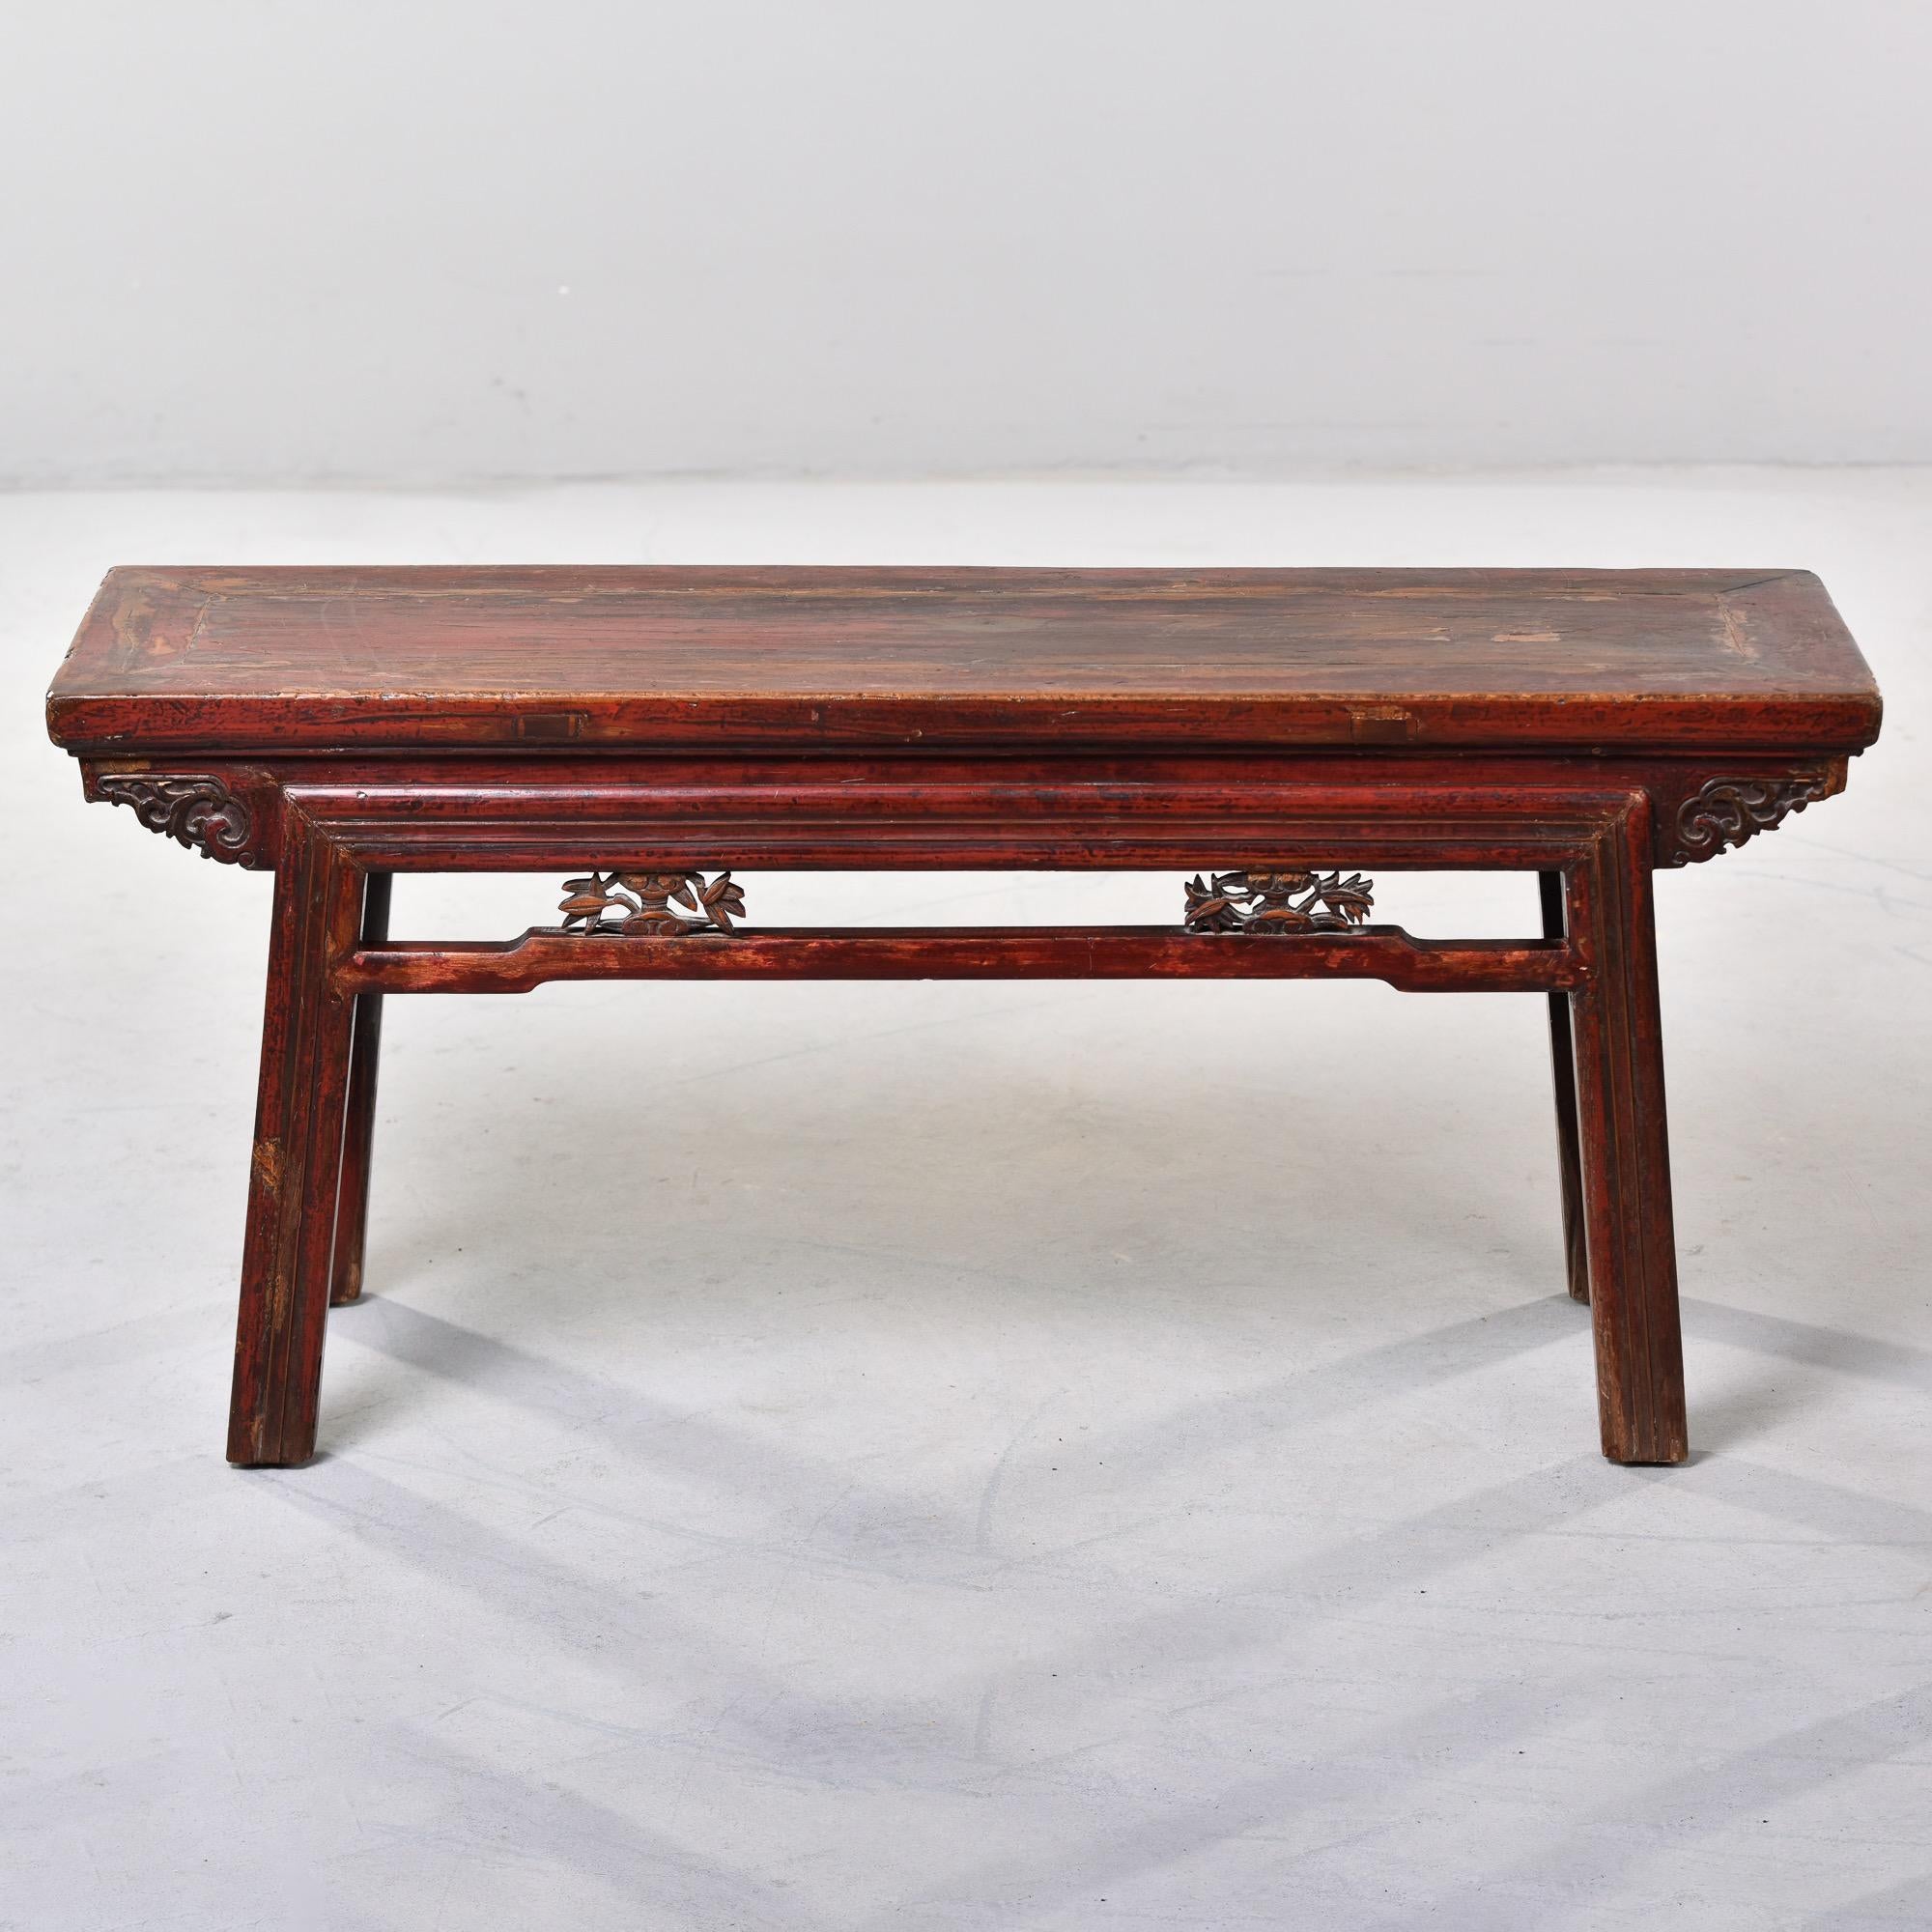 Circa 1900 Chinese elmwood bench from Don Yang City, China with carved details on stretcher and side supports. Great color and patina. Sturdy.